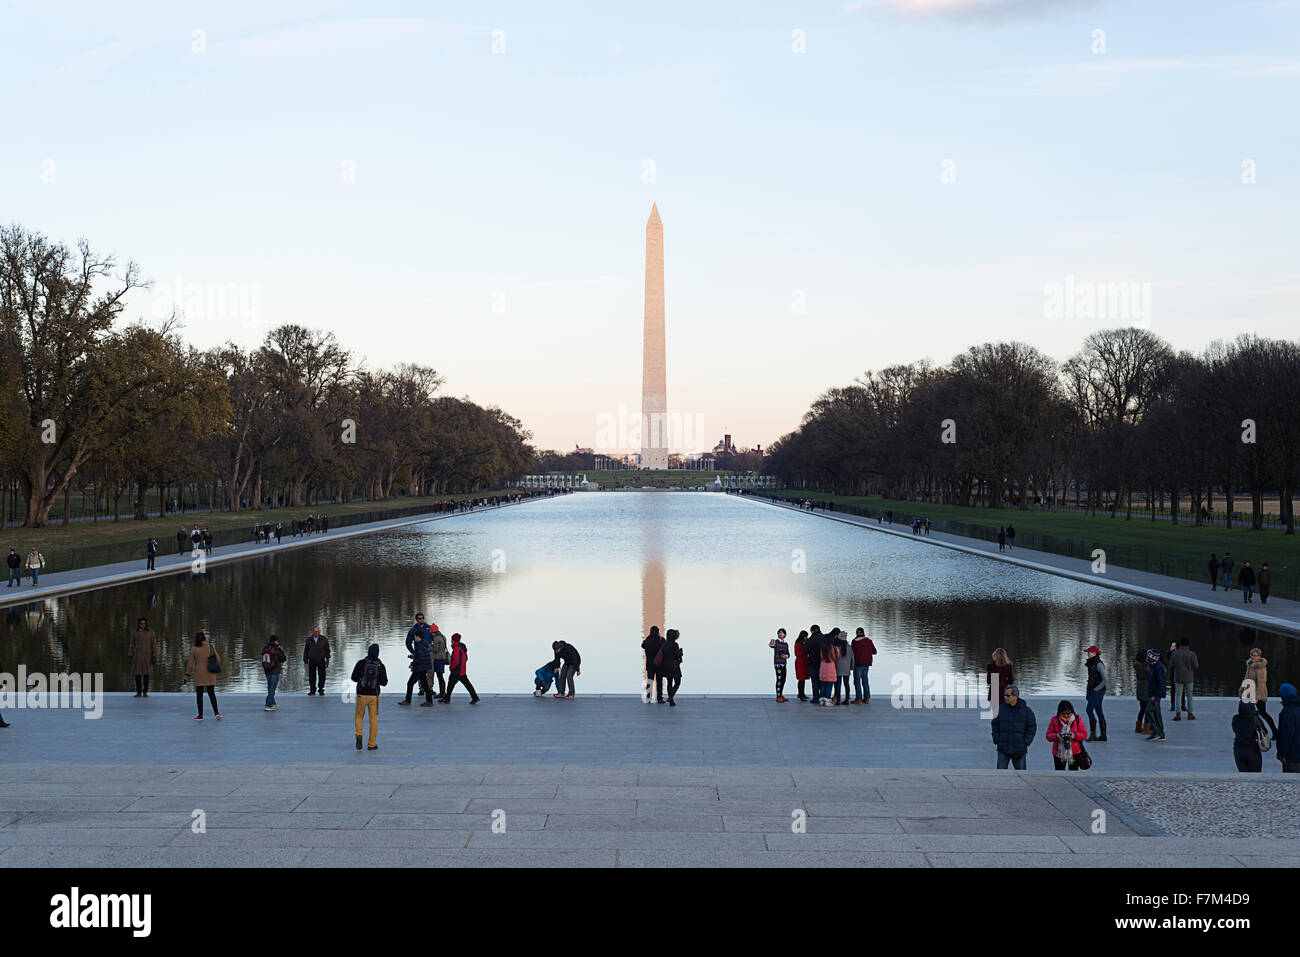 The Washington Monument and reflecting pool in Washington DC as viewed from the Lincoln Memorial. Stock Photo